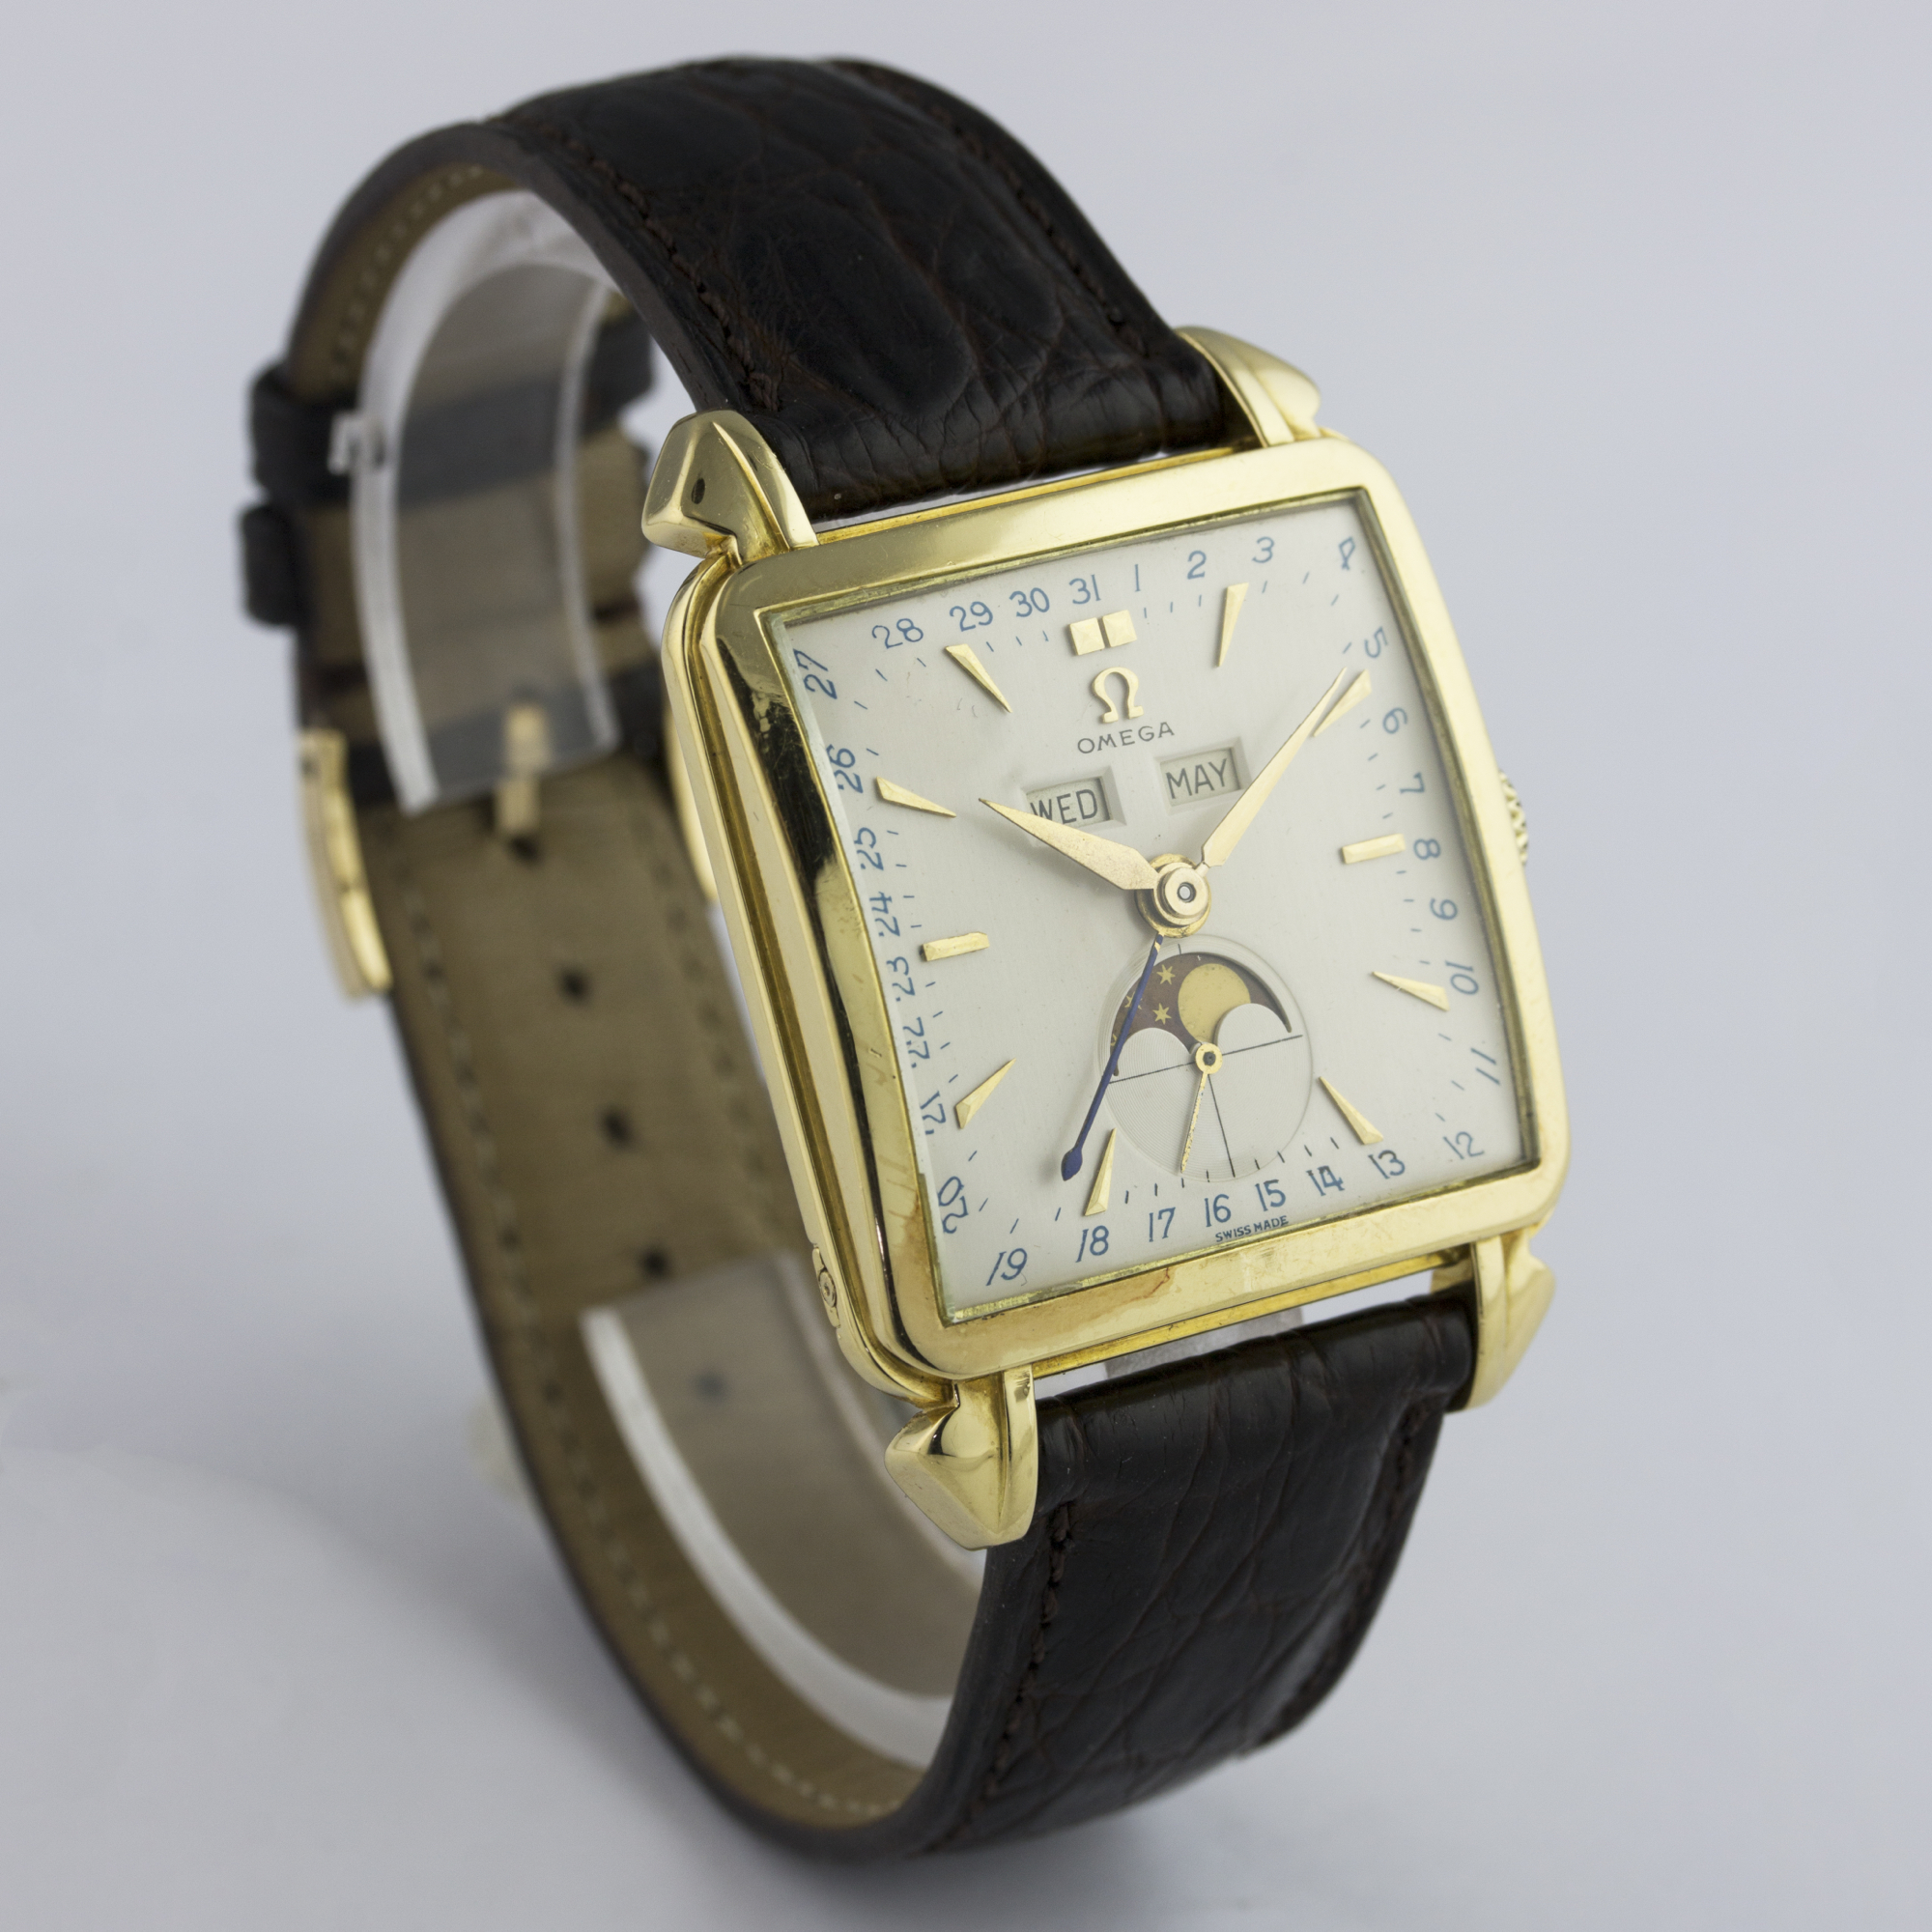 A RARE GENTLEMAN'S 18K SOLID GOLD OMEGA COSMIC MOONPHASE TRIPLE CALENDAR WRIST WATCH CIRCA 1951 D: - Image 5 of 9